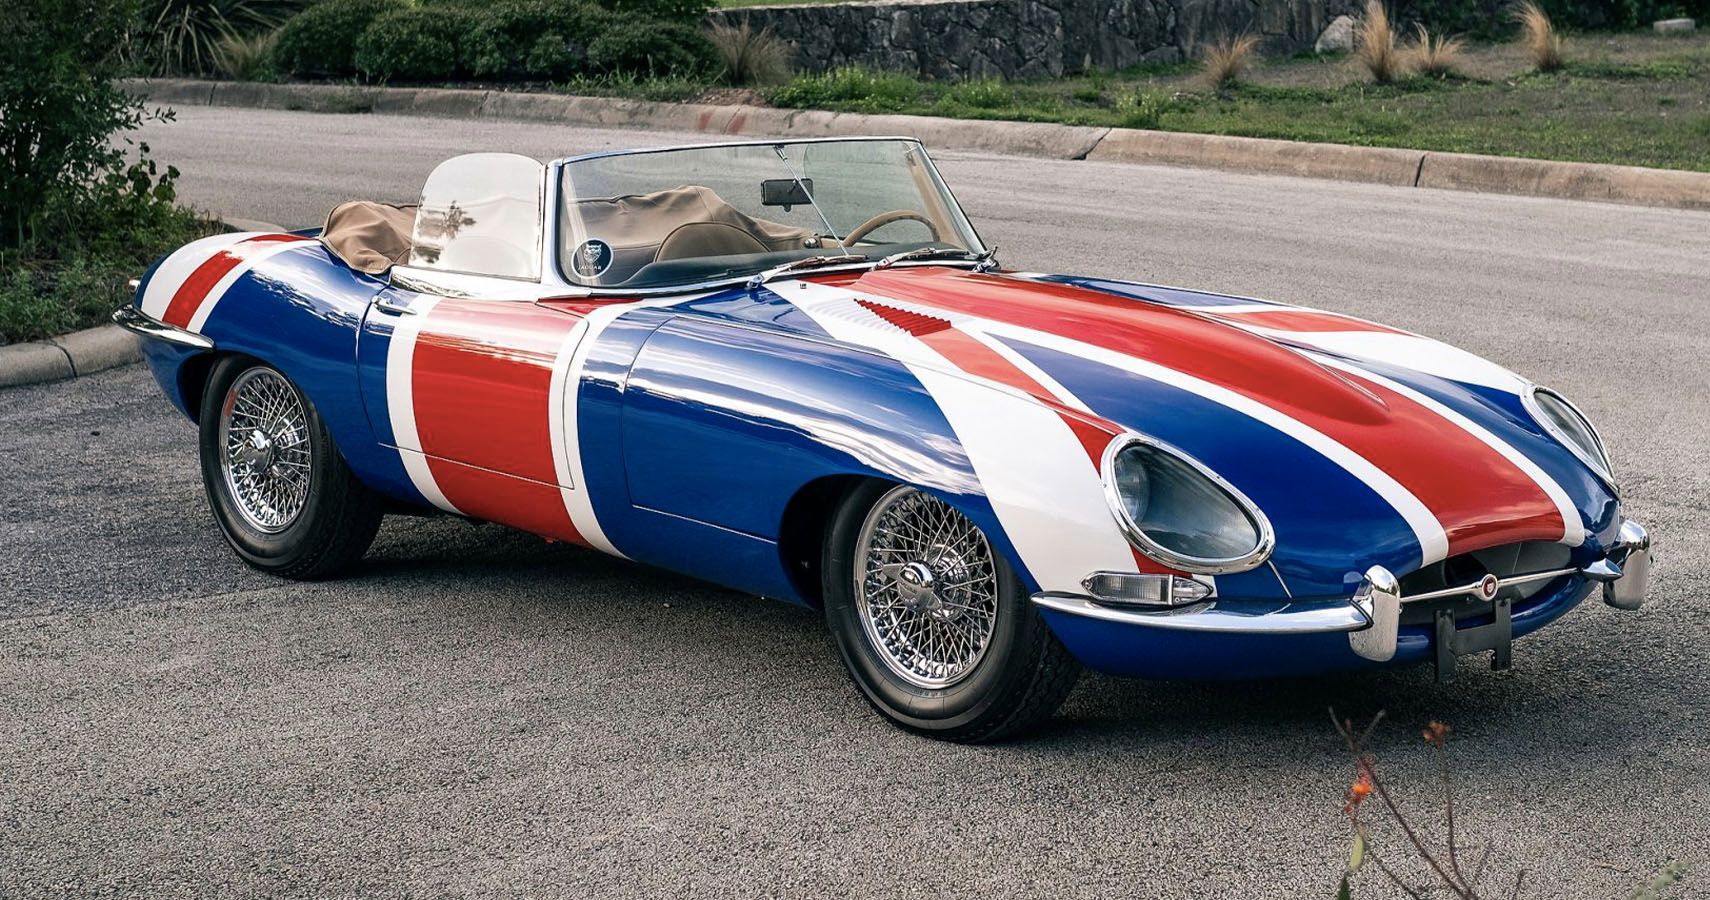 Groovy Baby! Austin Powers Inspired Jaguar XKE Pops Up For Sale